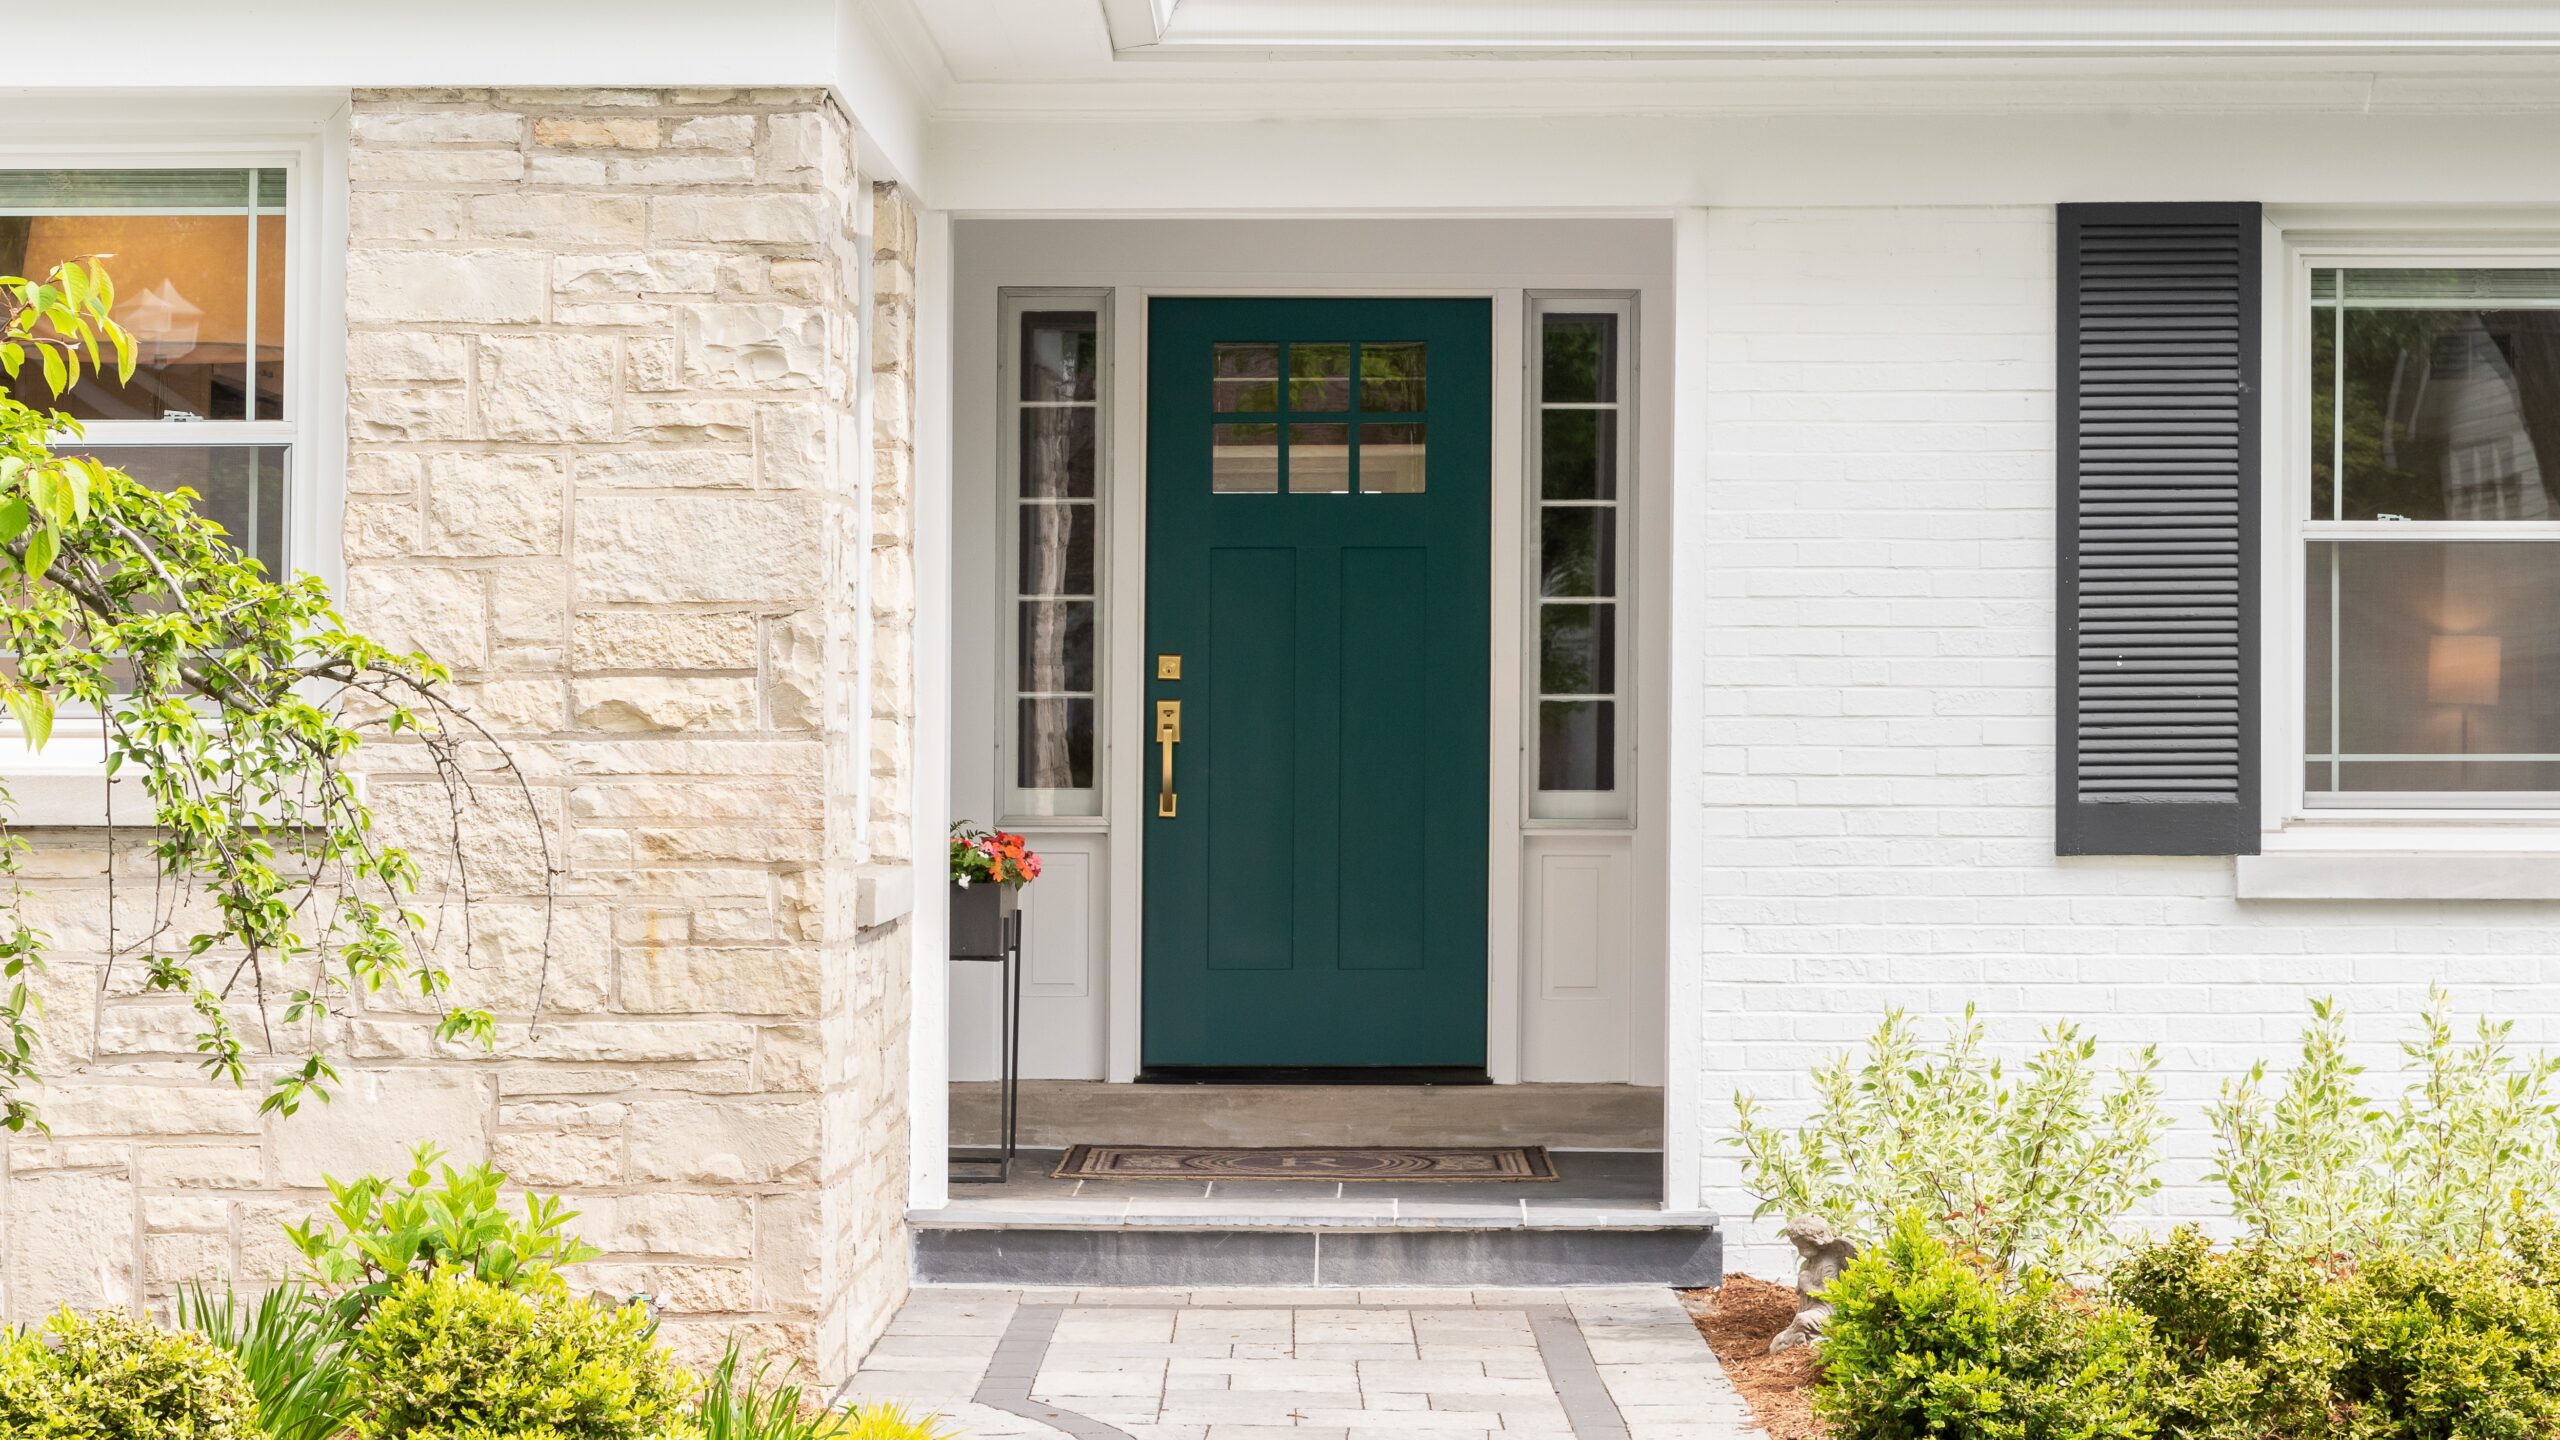 A green door in a home with white siding and stone columns